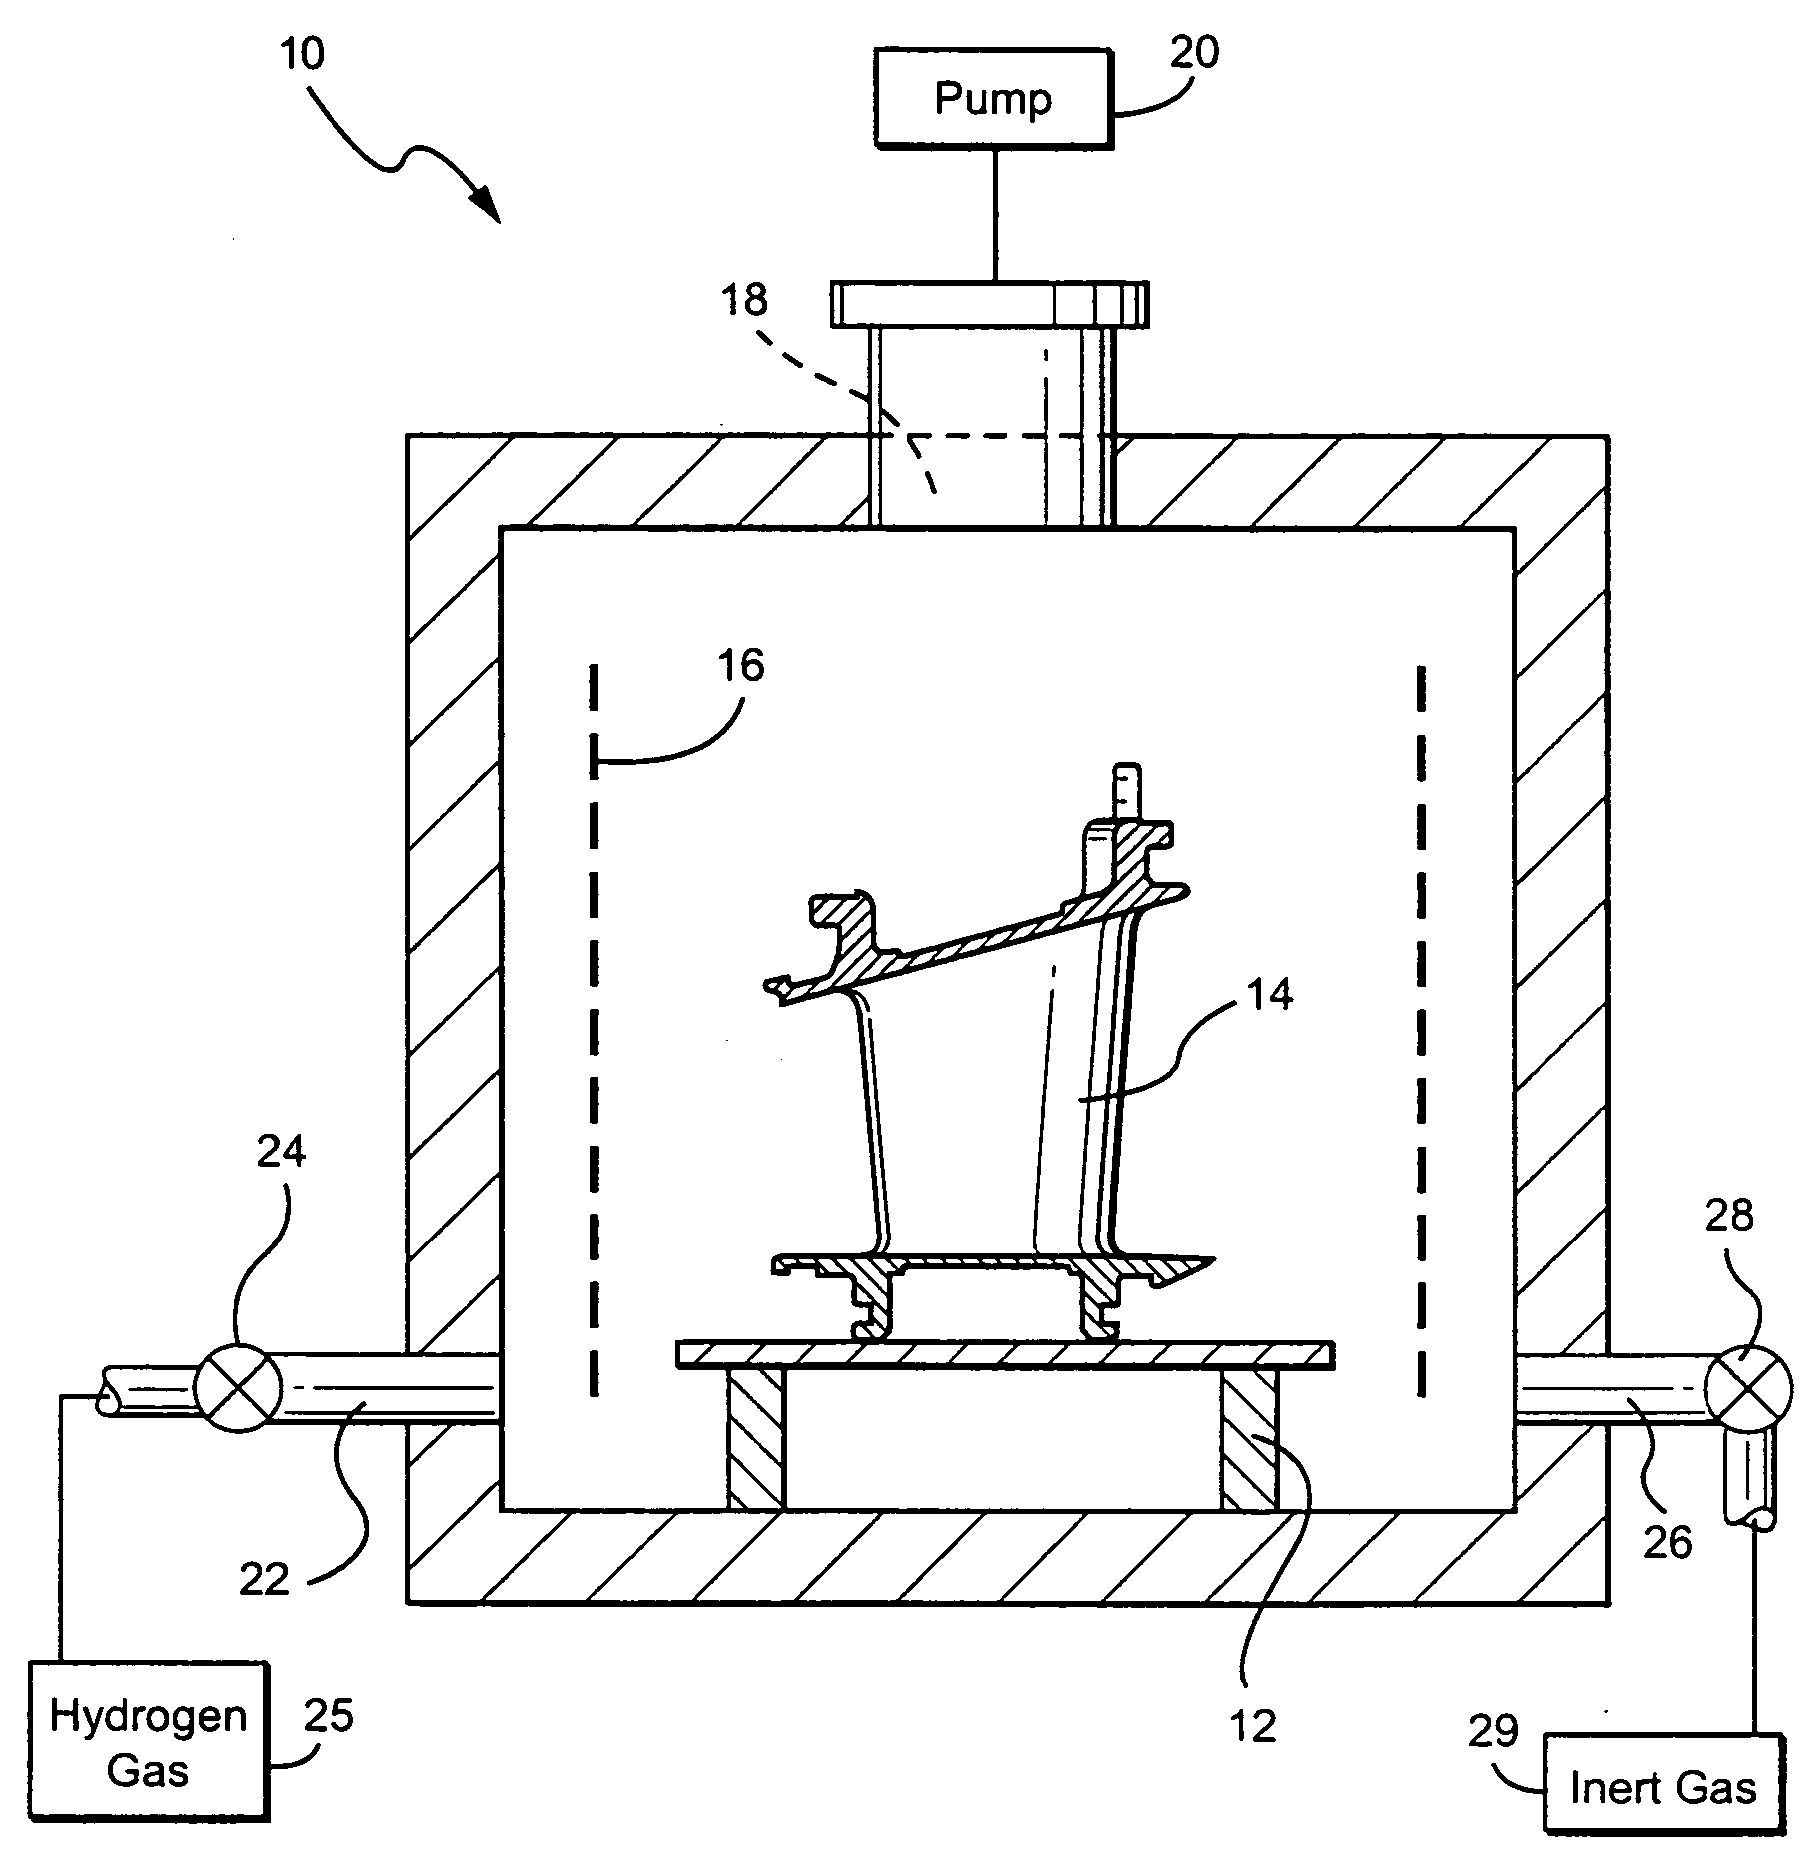 Methods of hydrogen cleaning of metallic surfaces